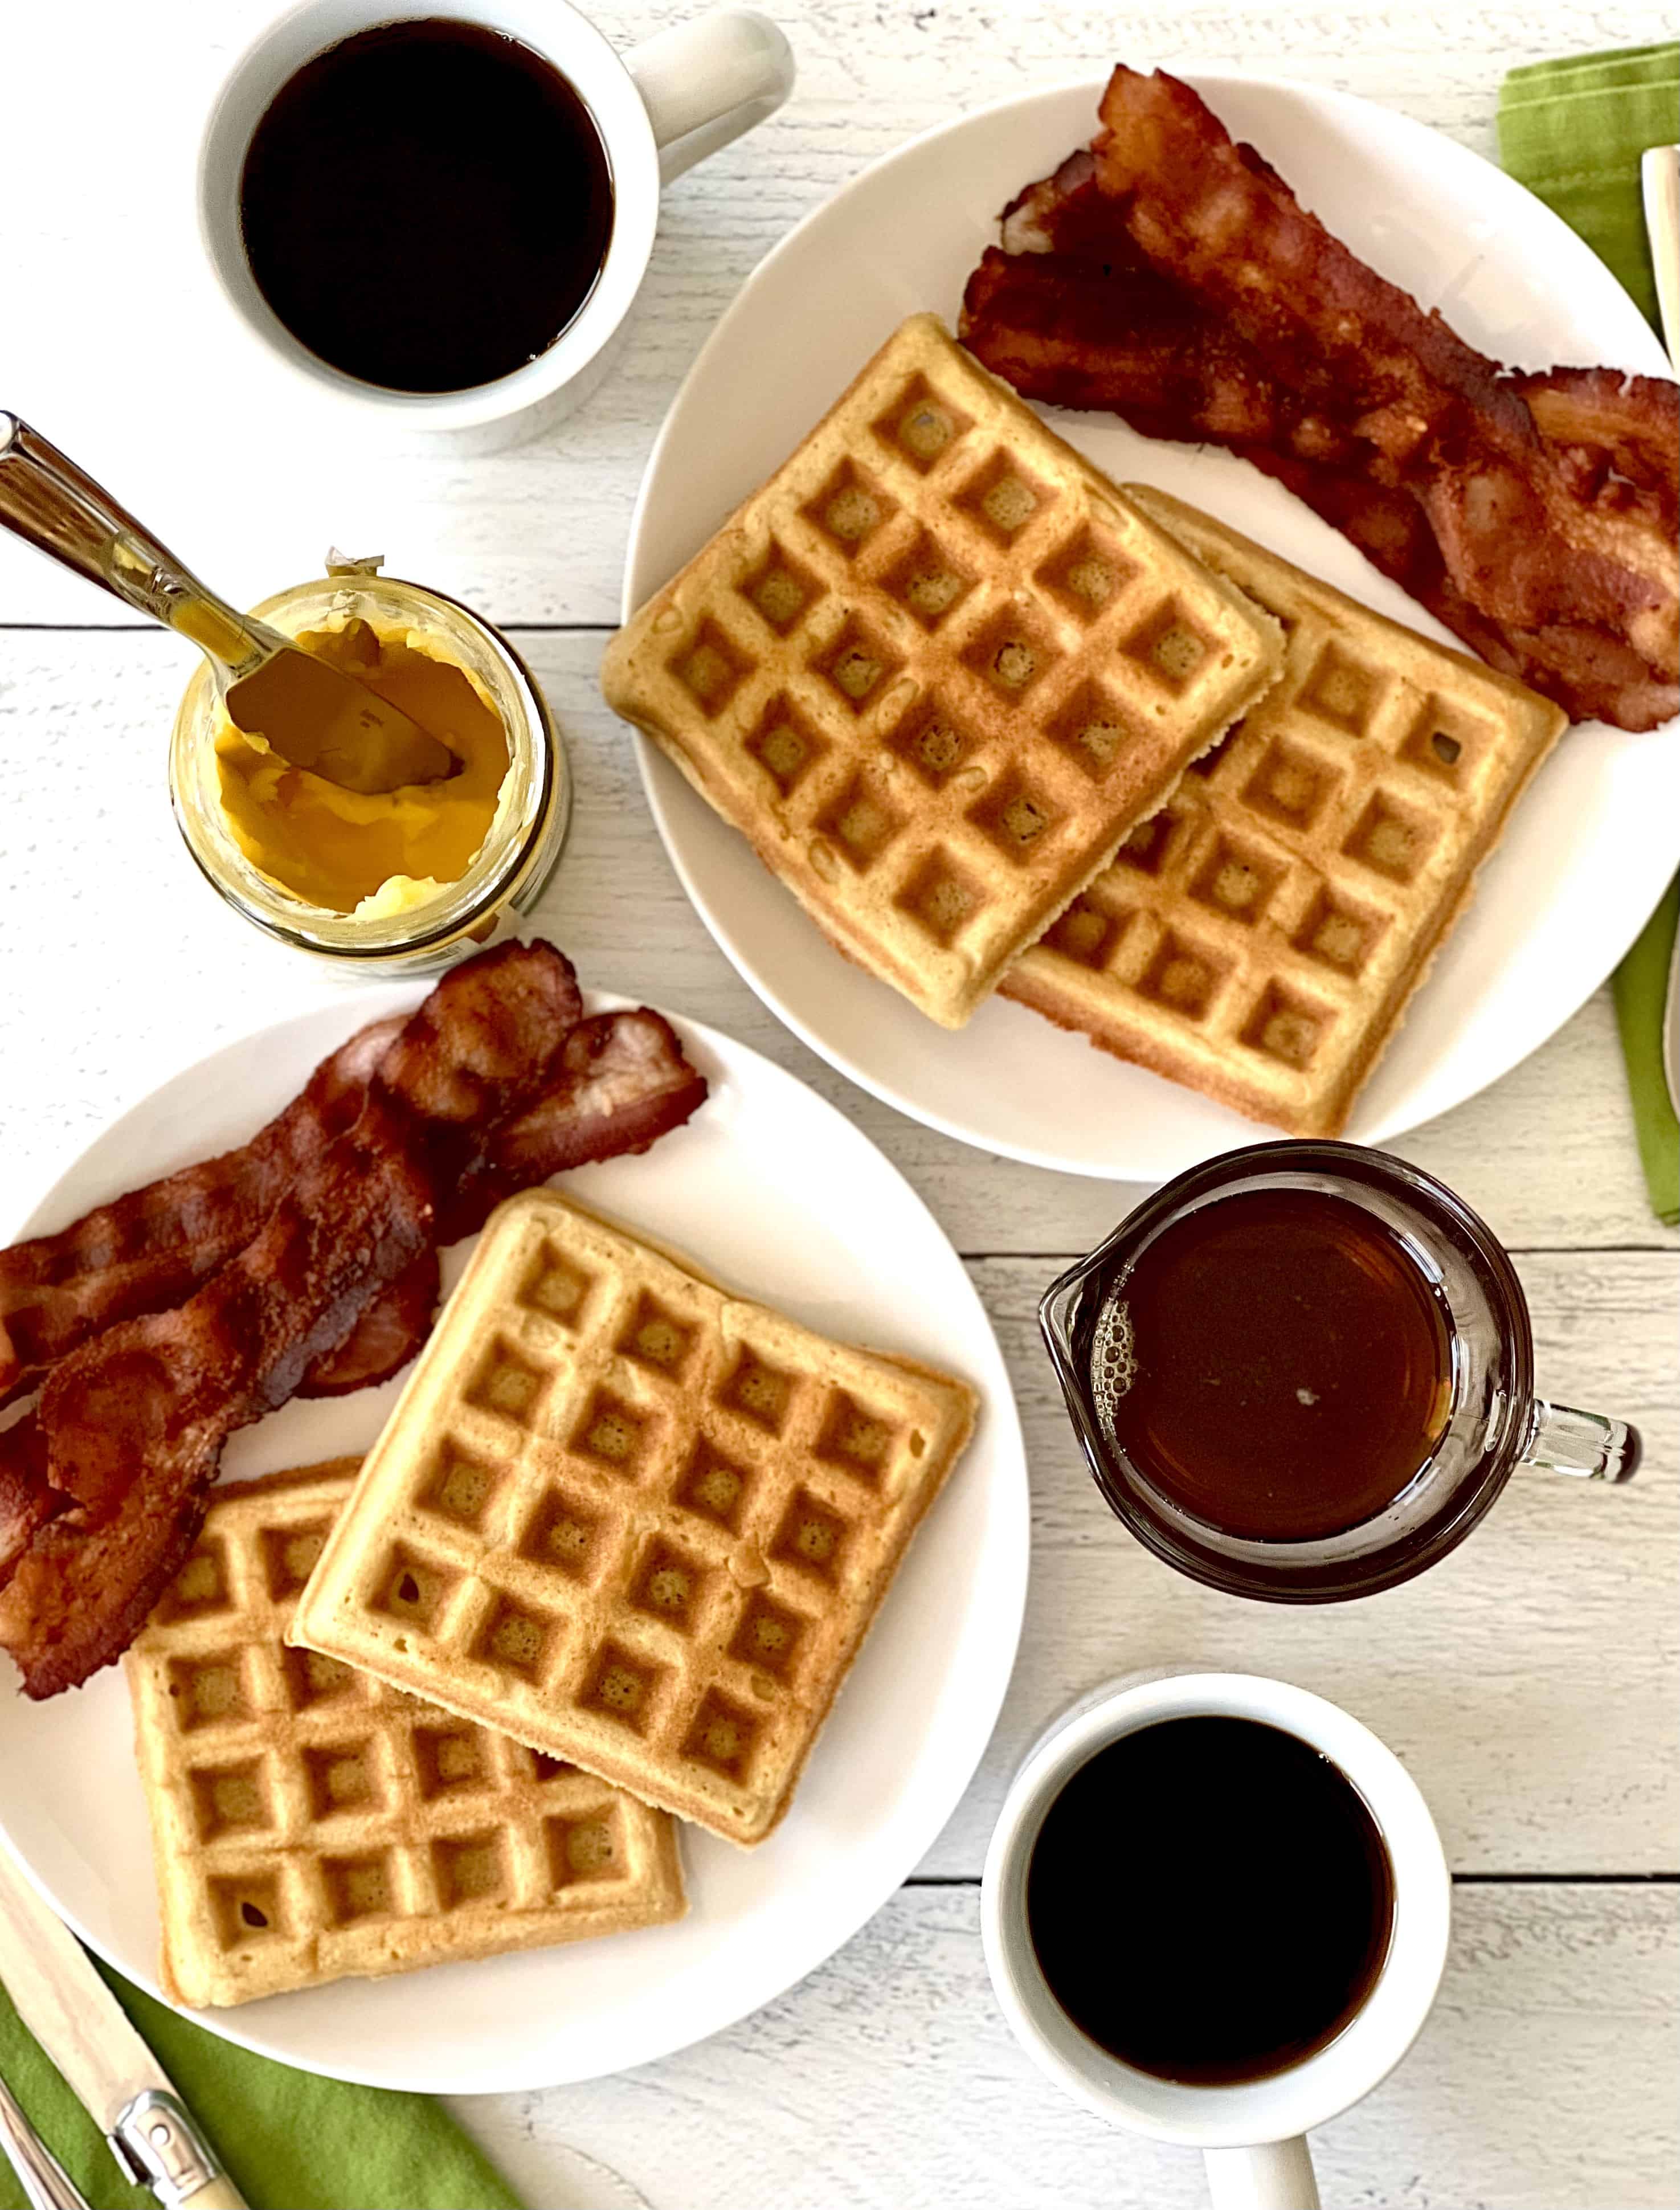 gluten-free waffles on white plates with bacon, next to white mugs of coffee, a glass pitcher of maple syrup and a jar of ghee